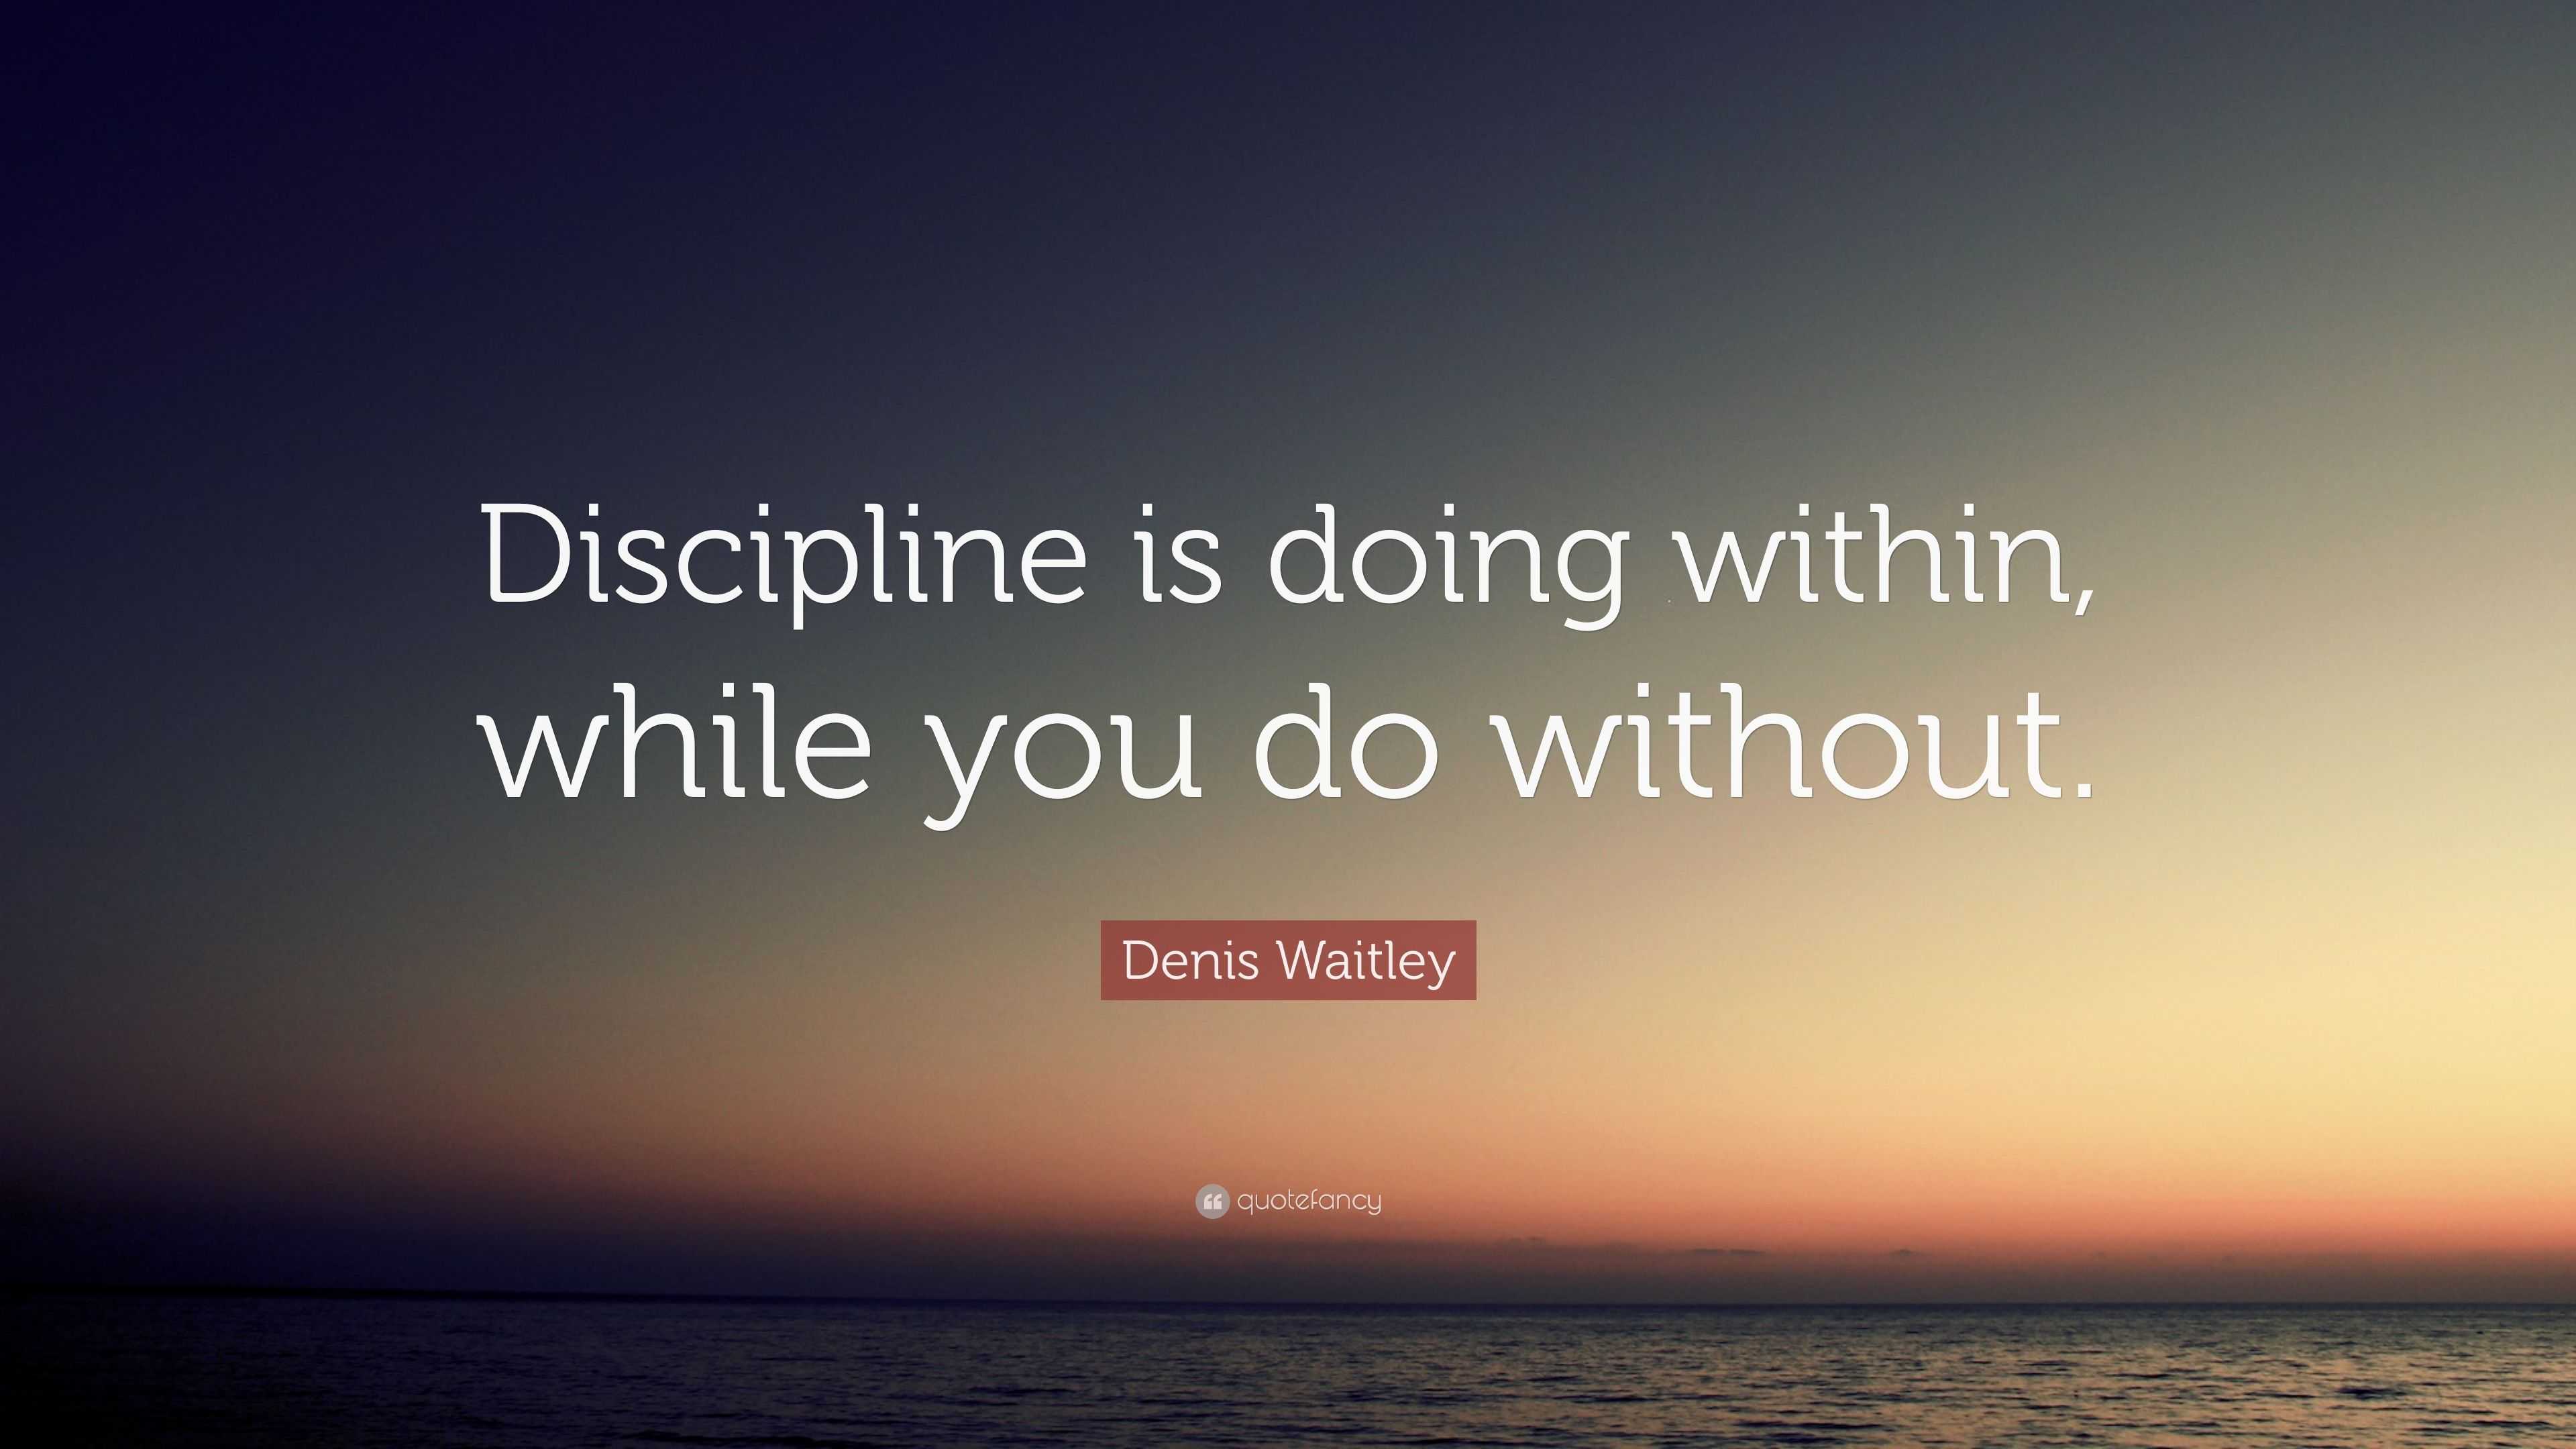 Denis Waitley Quote: “Discipline is doing within, while you do without.”